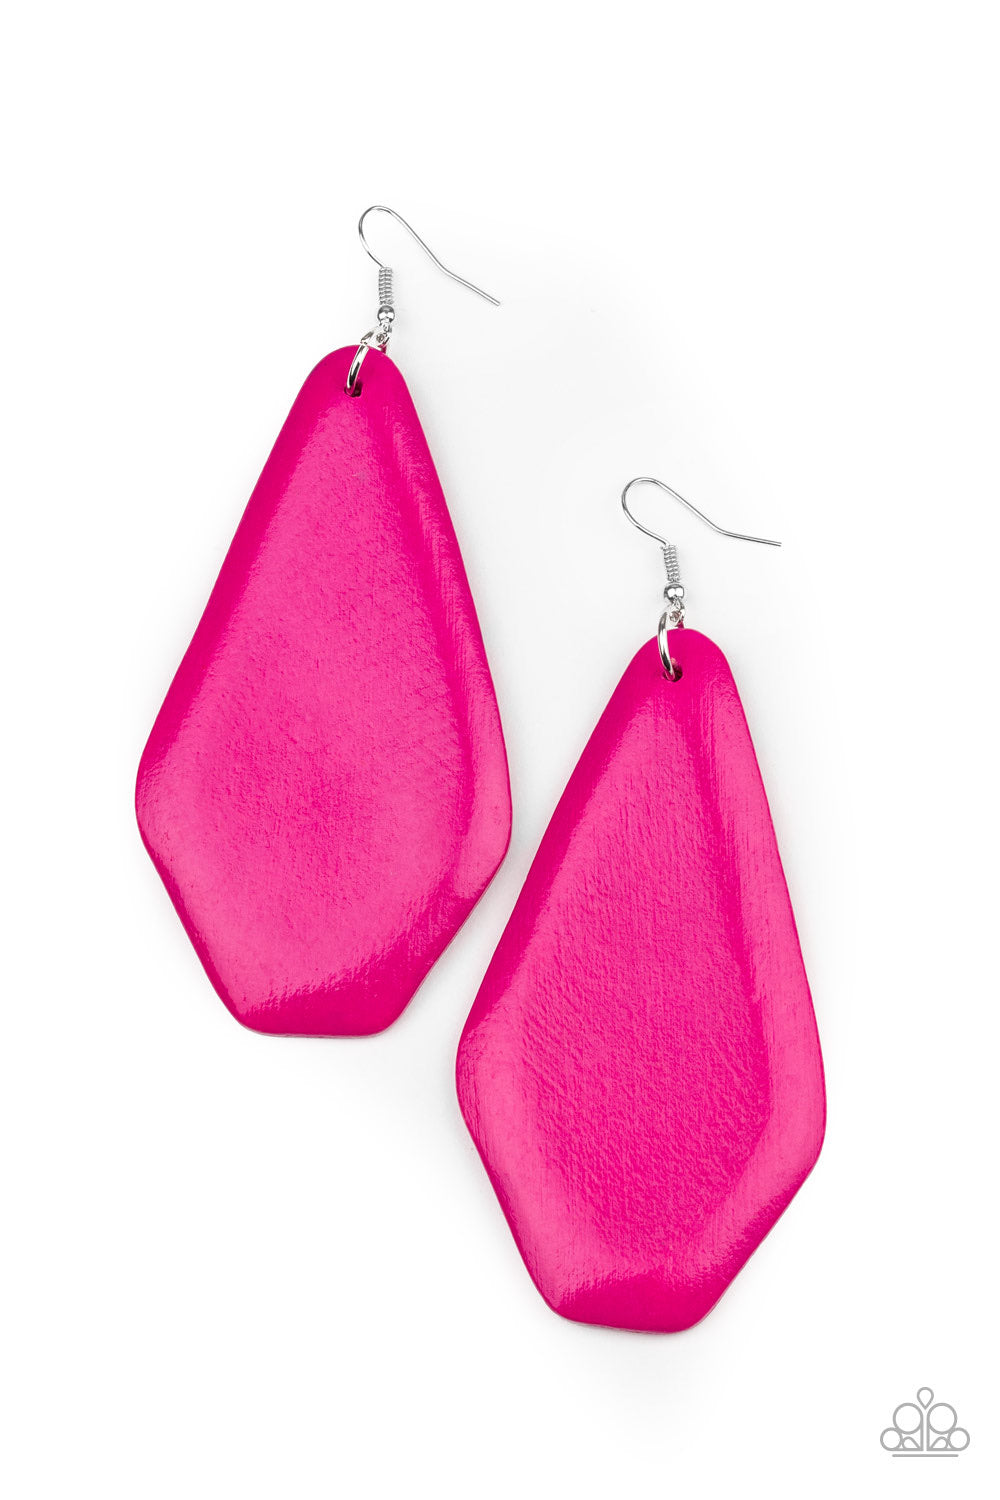 Vacation Ready Pink-Earrings